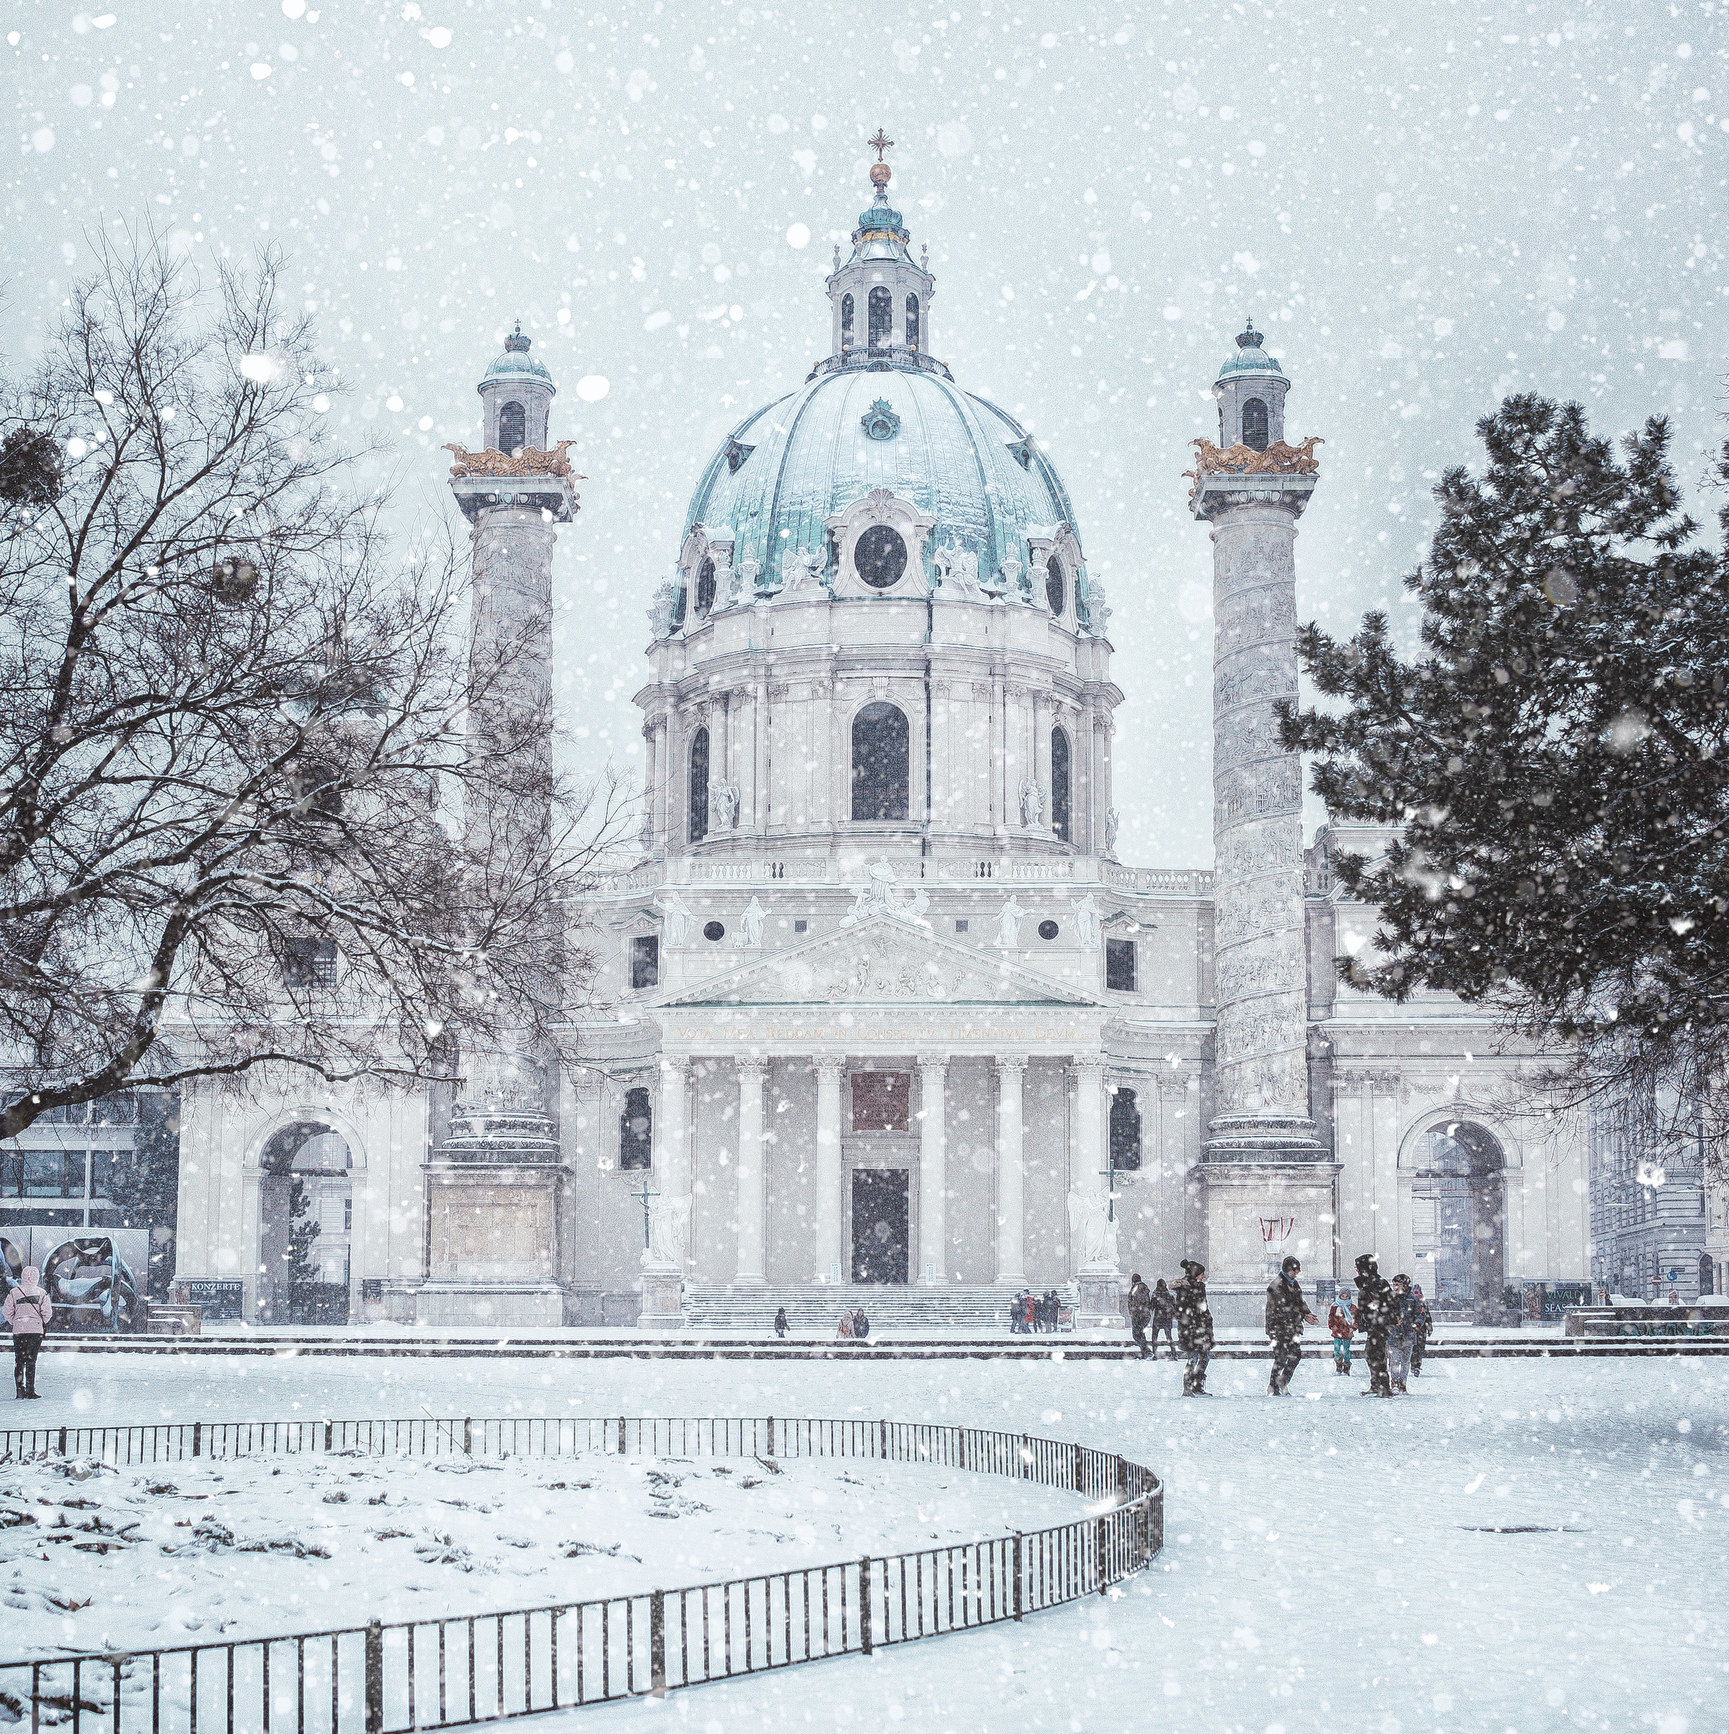 A beautiful church in the snow.